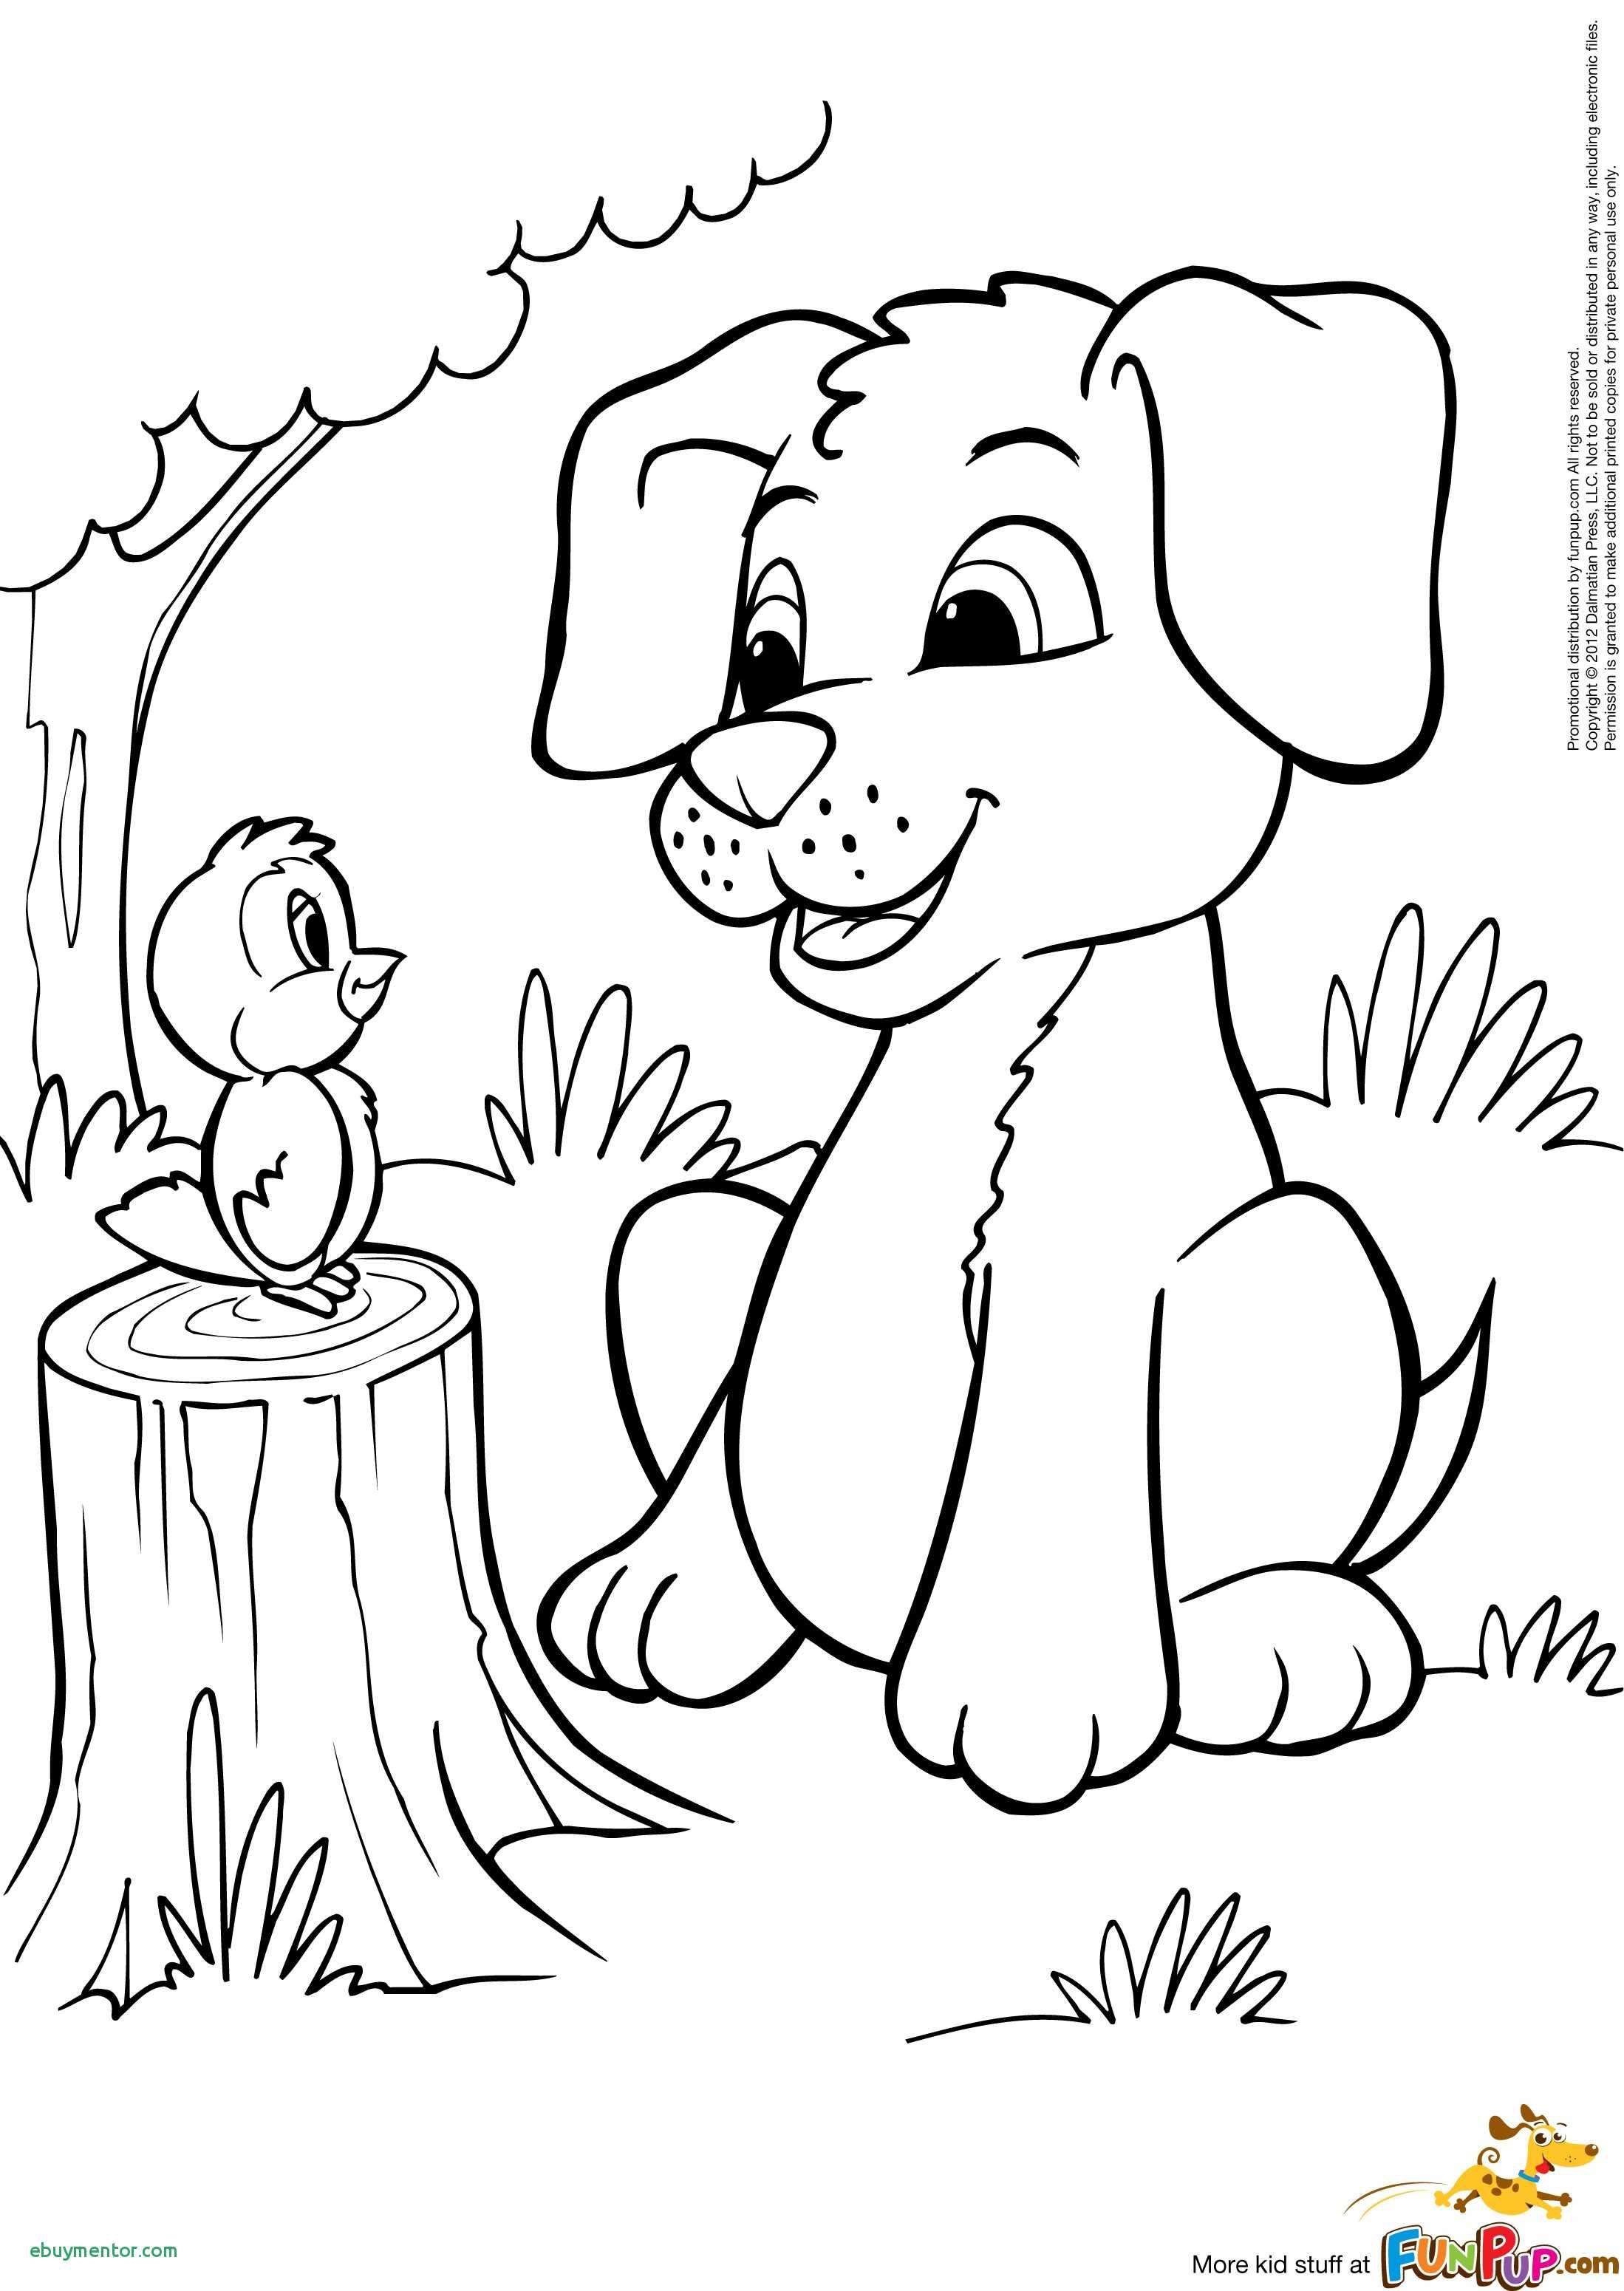 Puppy and Kitten Coloring Pages Wallpaper